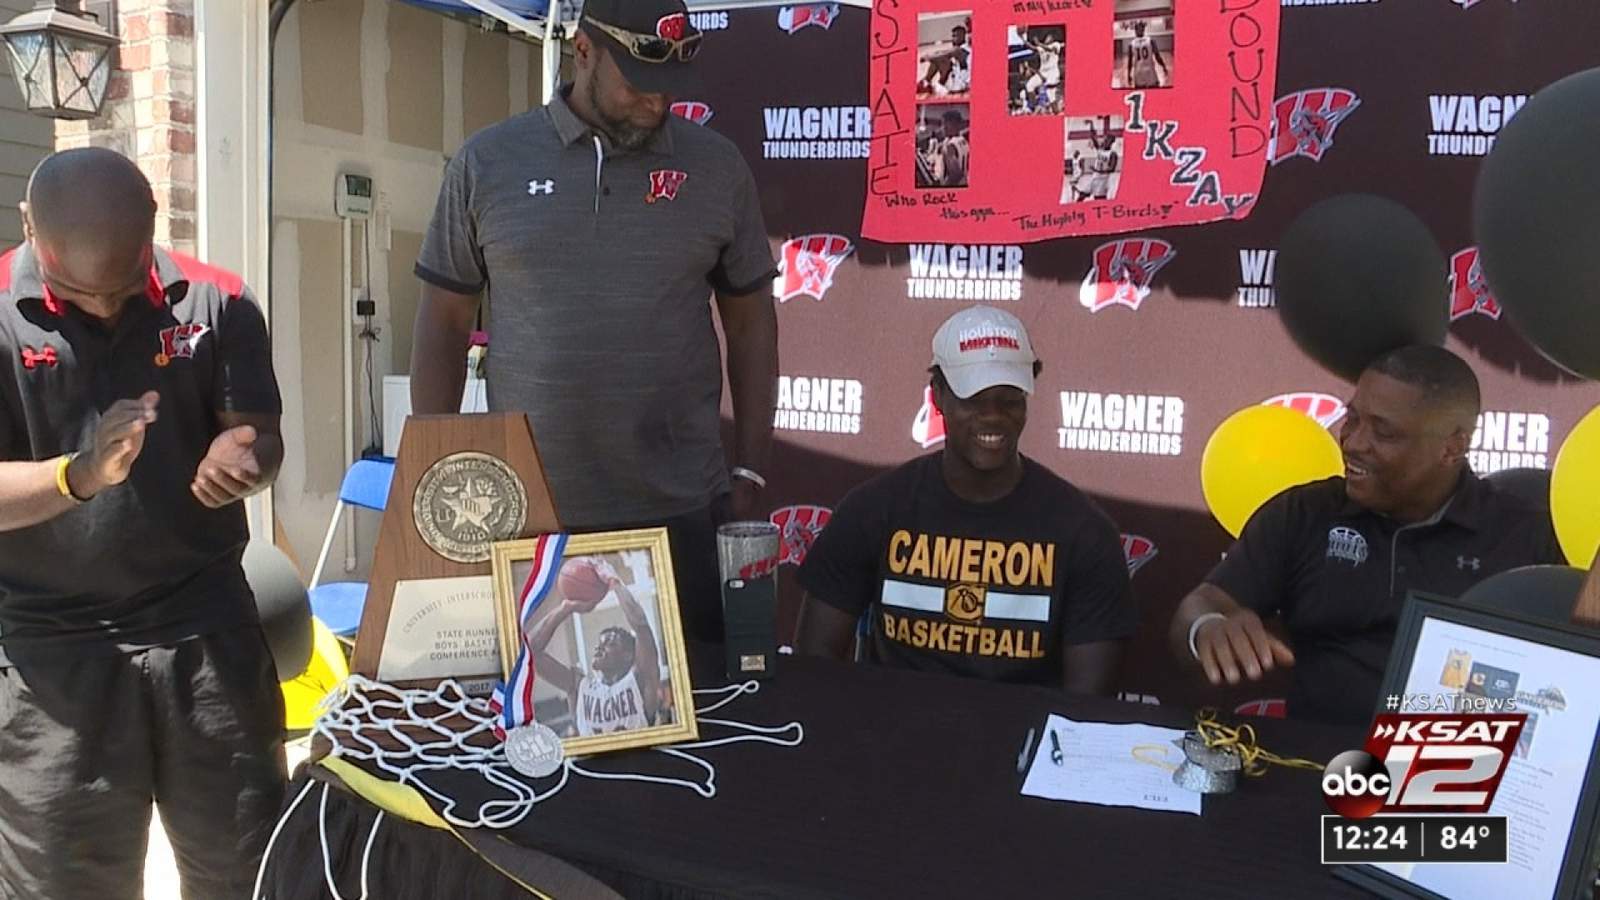 Wagner’s Isaiah Kennedy commits to play basketball for Cameron University